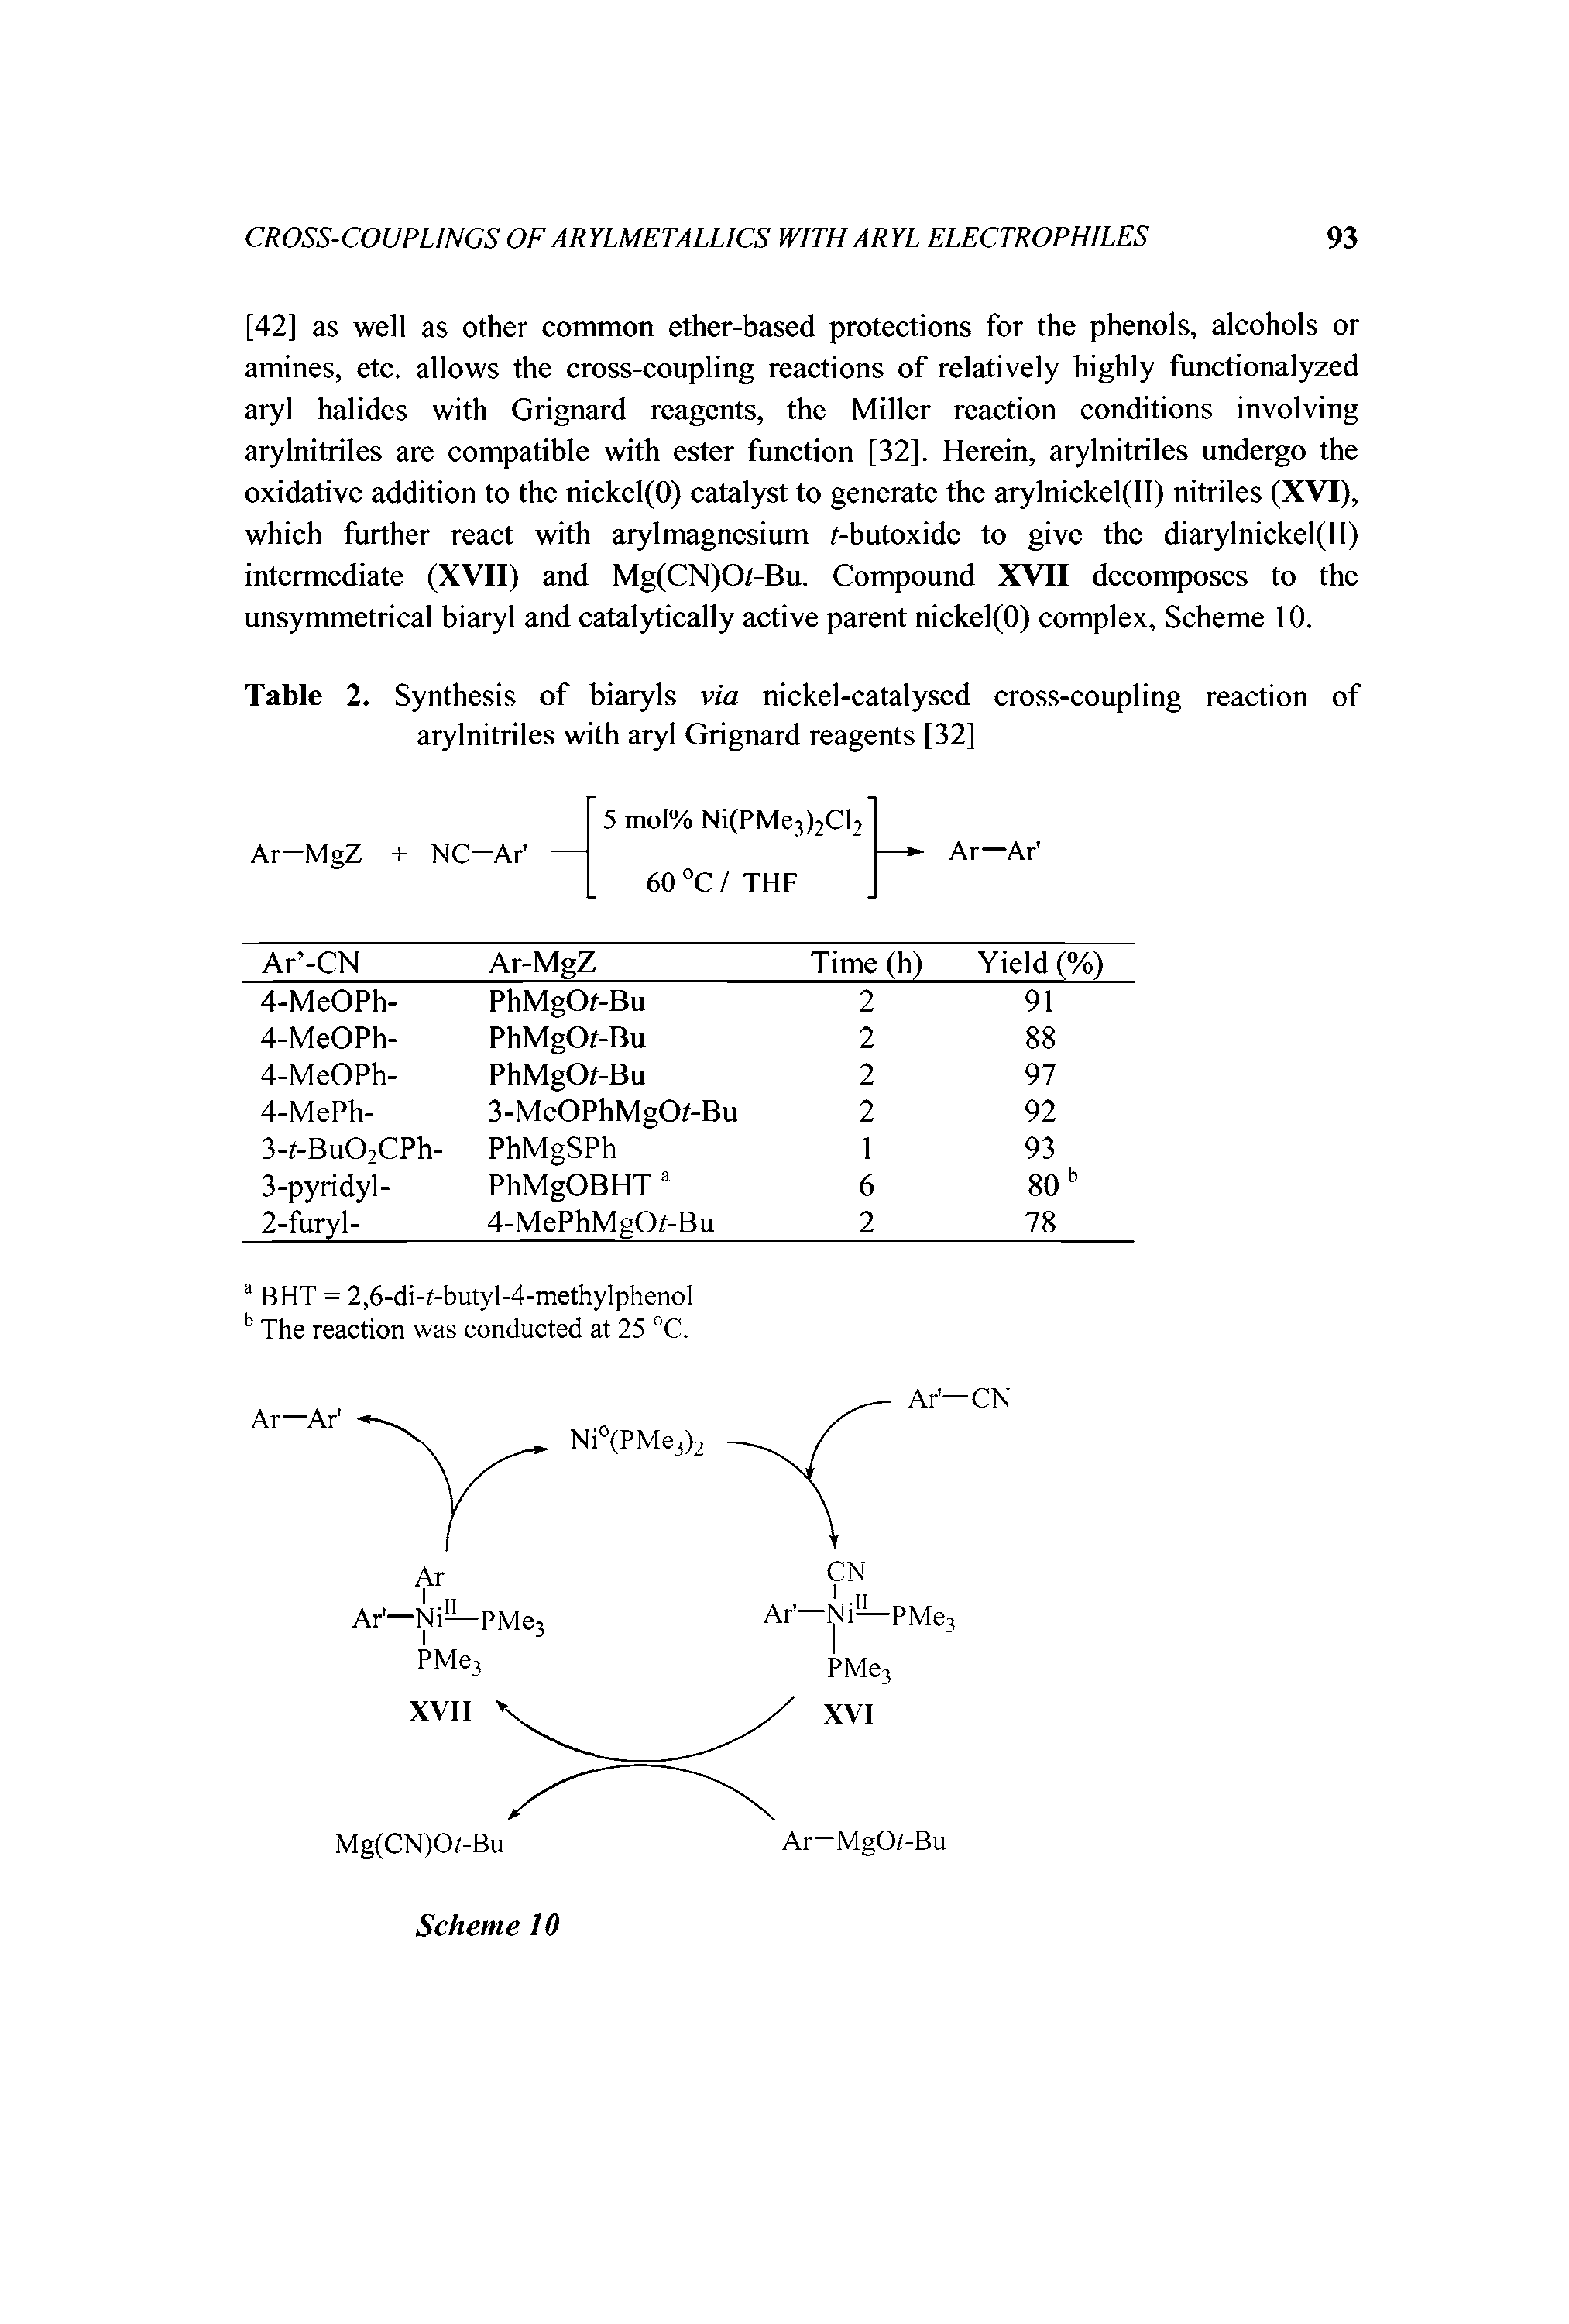 Table 2. Synthesis of biaryls via nickel-catalysed cross-coupling reaction of arylnitriles with aryl Grignard reagents [32]...